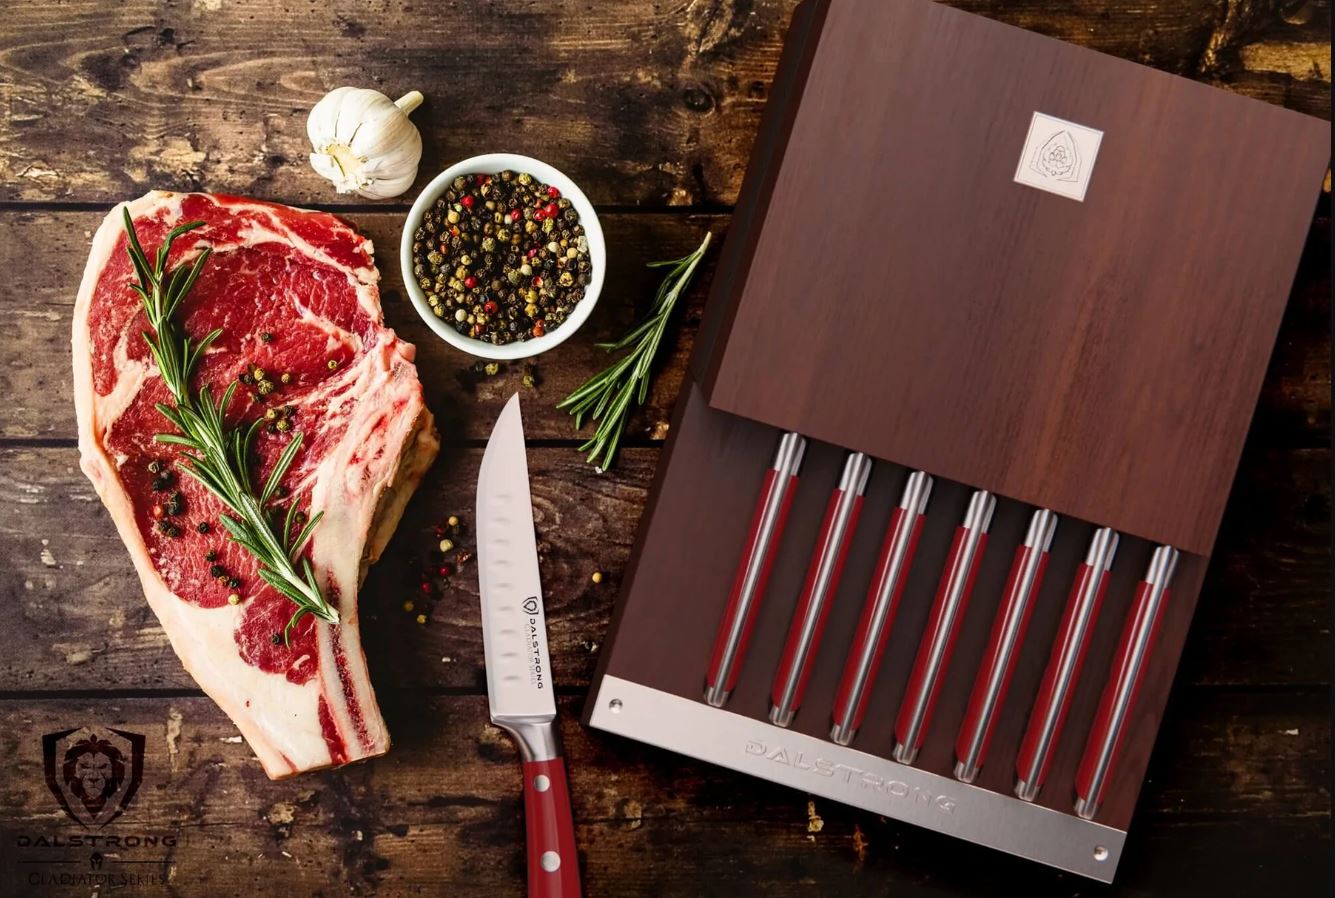 Multi-color Ultra-Sharp Serrated Solid Handle Steak Knives Cut Cleanly  Stainless Steel Cutlery Set, 6-Piece Colorful Steak Knife Sets, Dishwasher  Safe